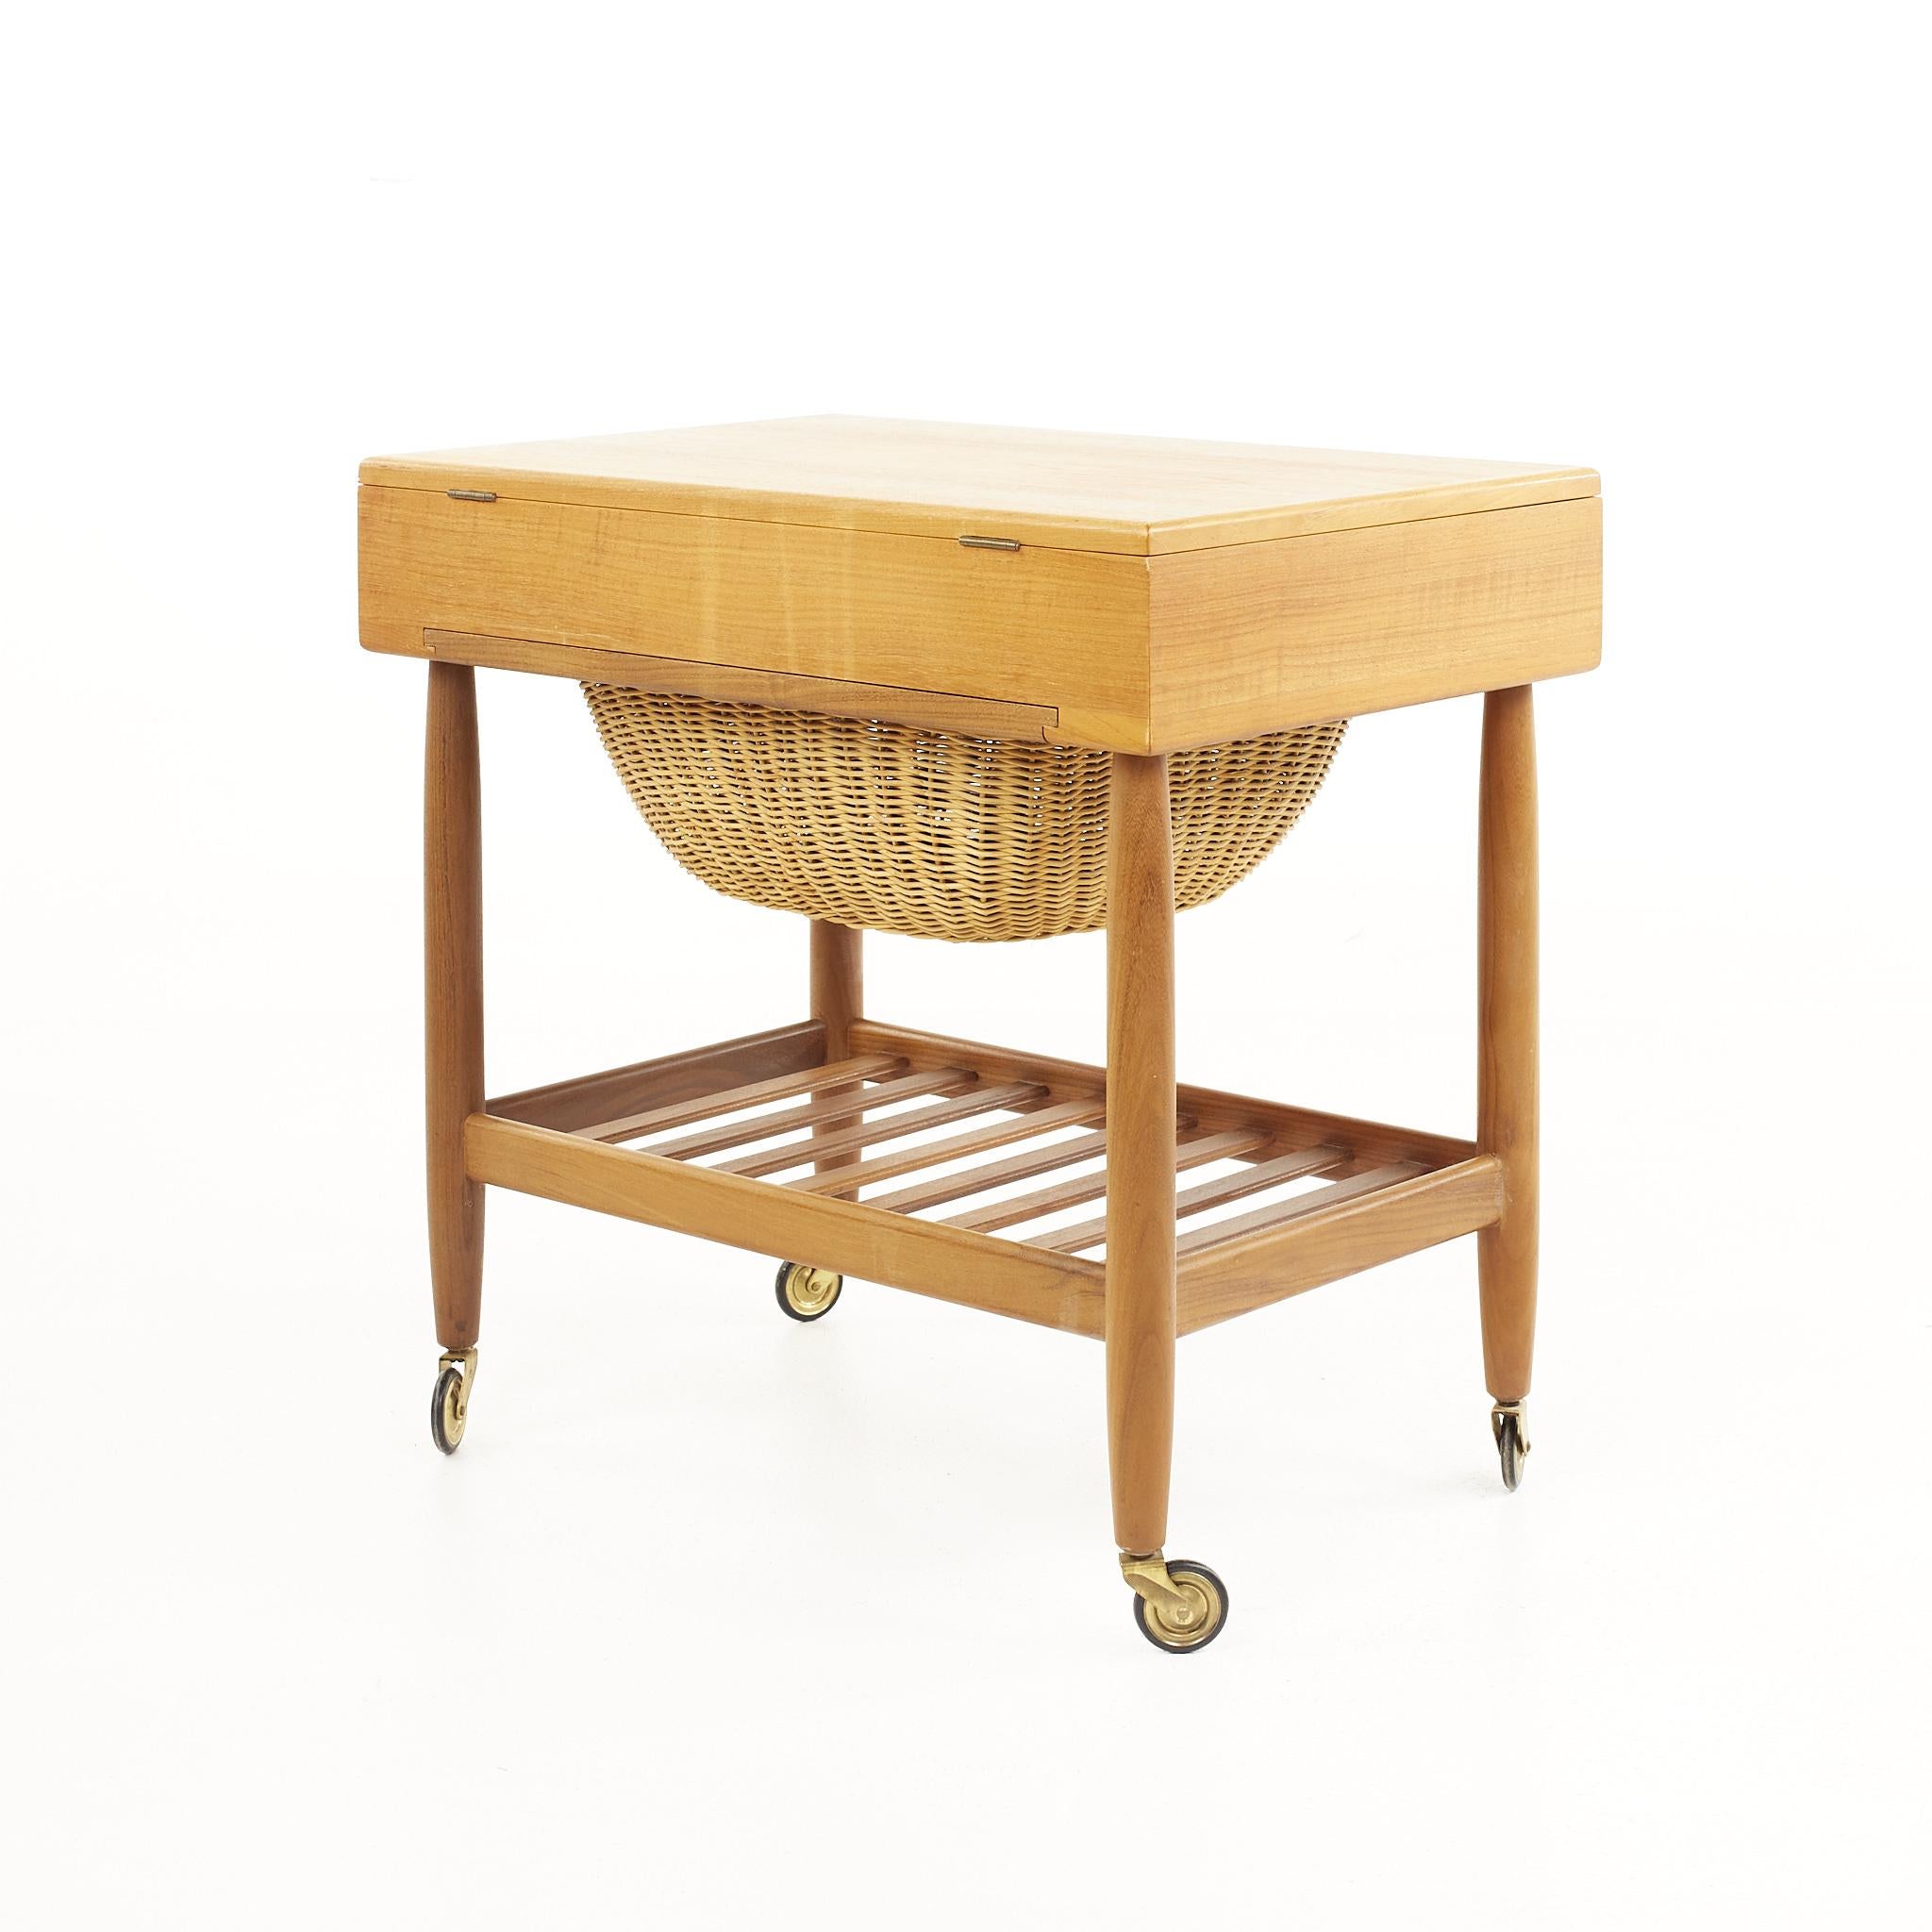 Late 20th Century Vitzé Mid-Century Teak Sewing Table with Basket